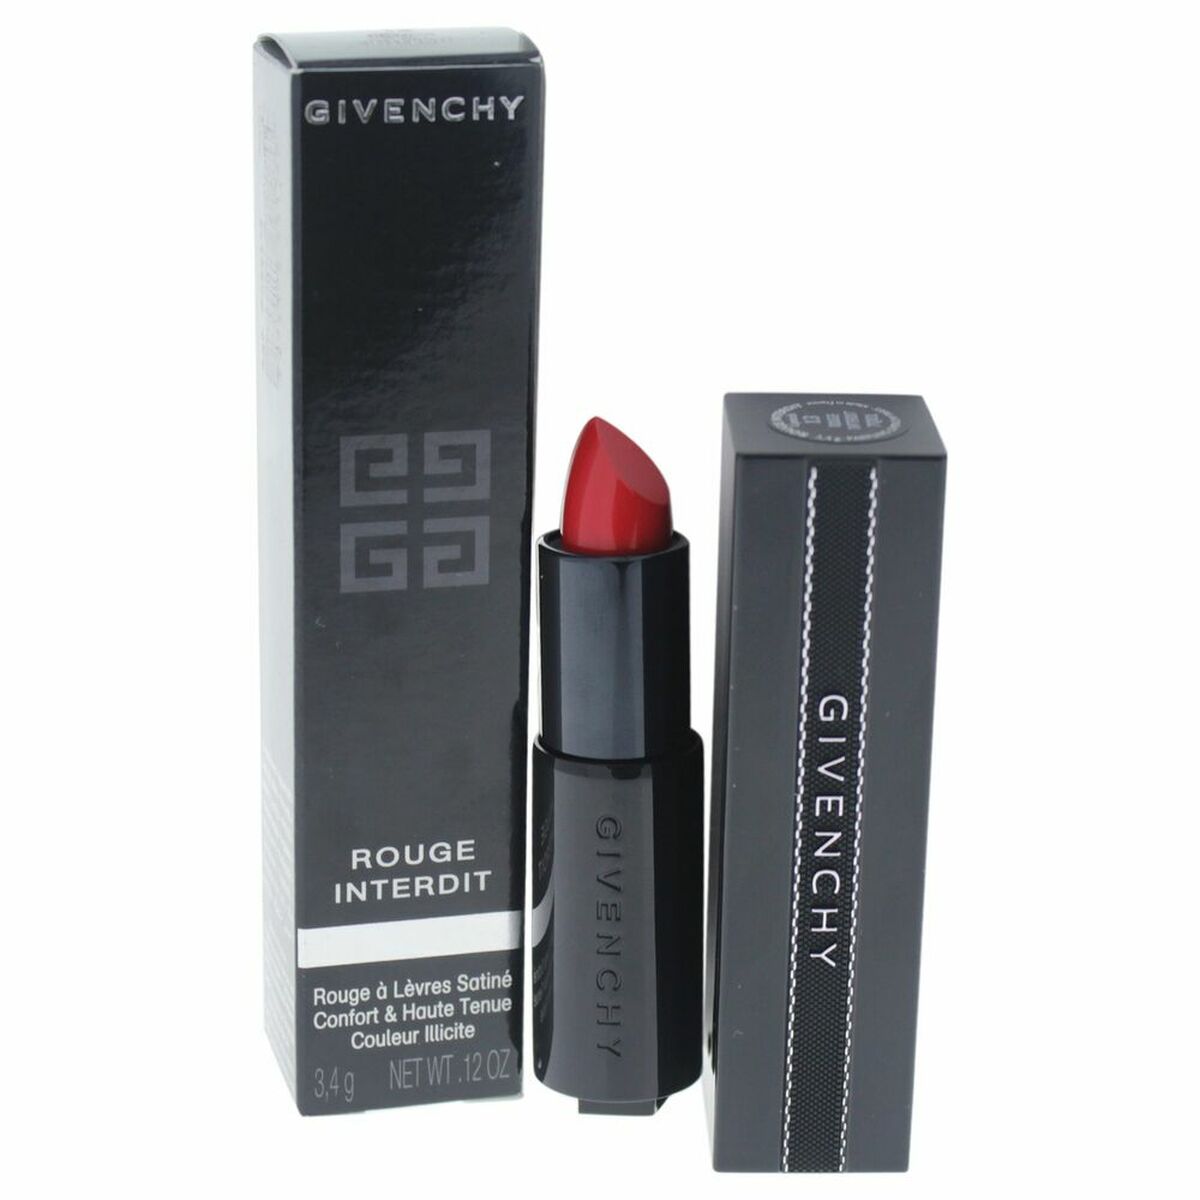 Lipstick Givenchy Rouge Interdit Lips N13 3,4 g-0